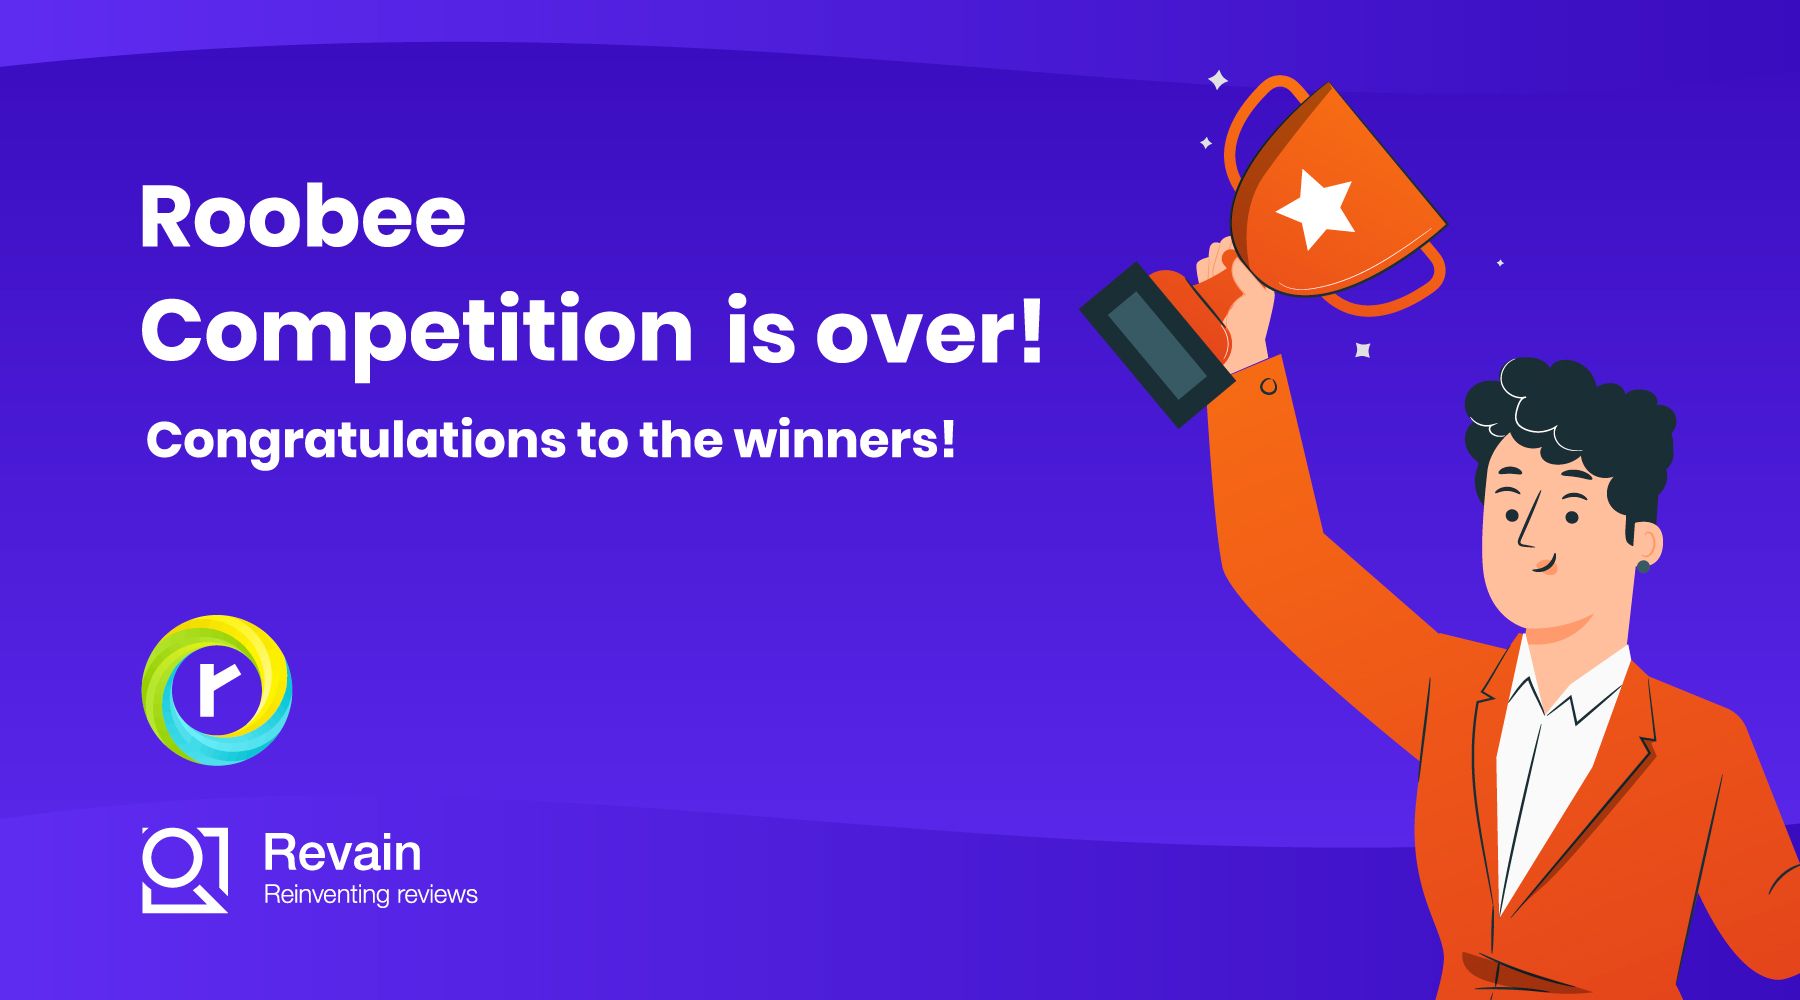 Roobee & Revain review contest has come to an end!